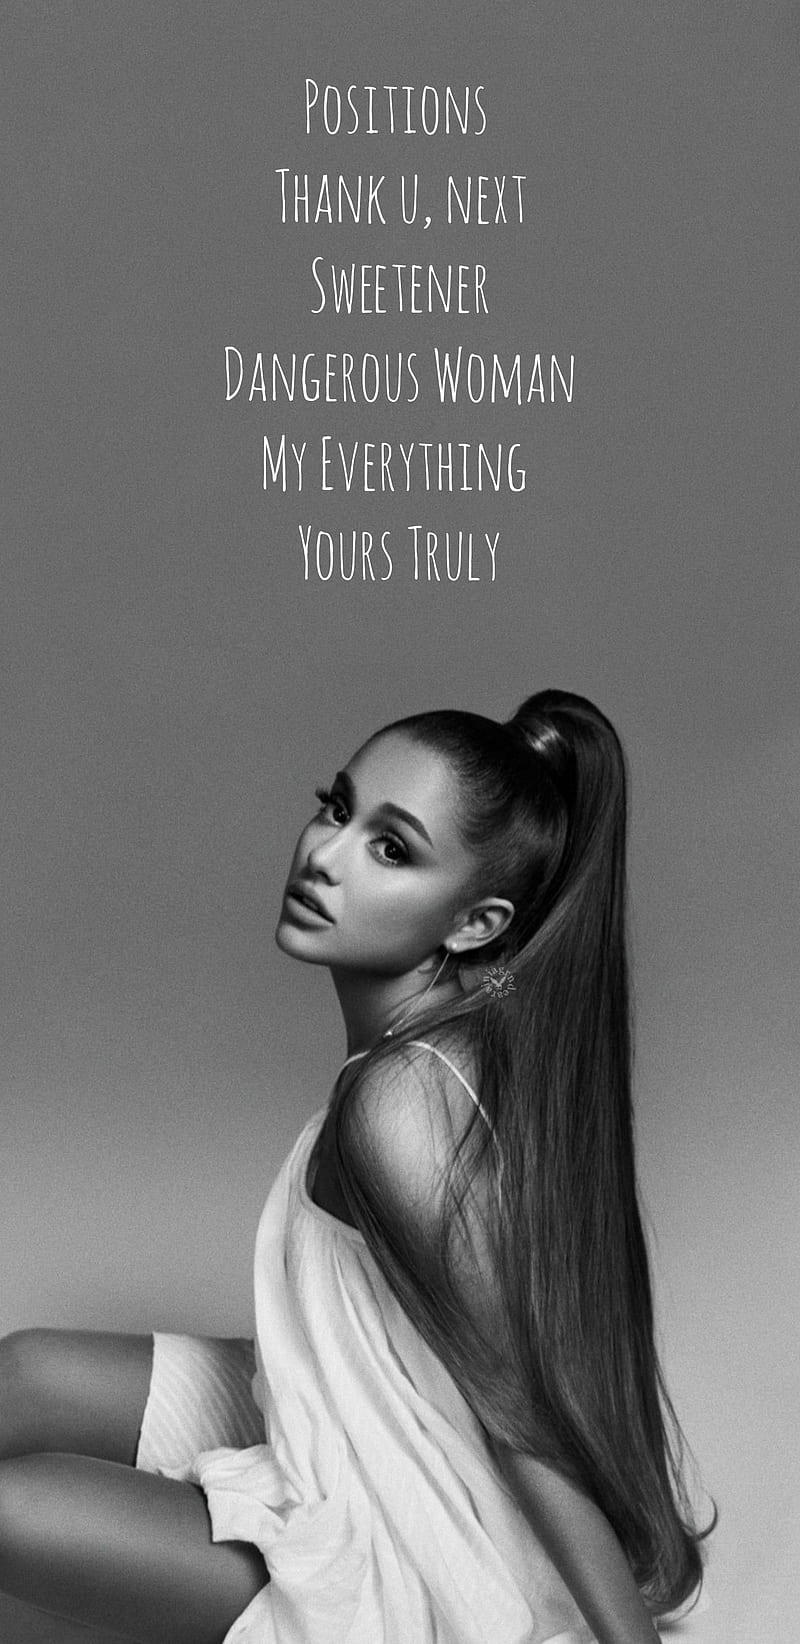 ariana grande yours truly album cover wallpaper